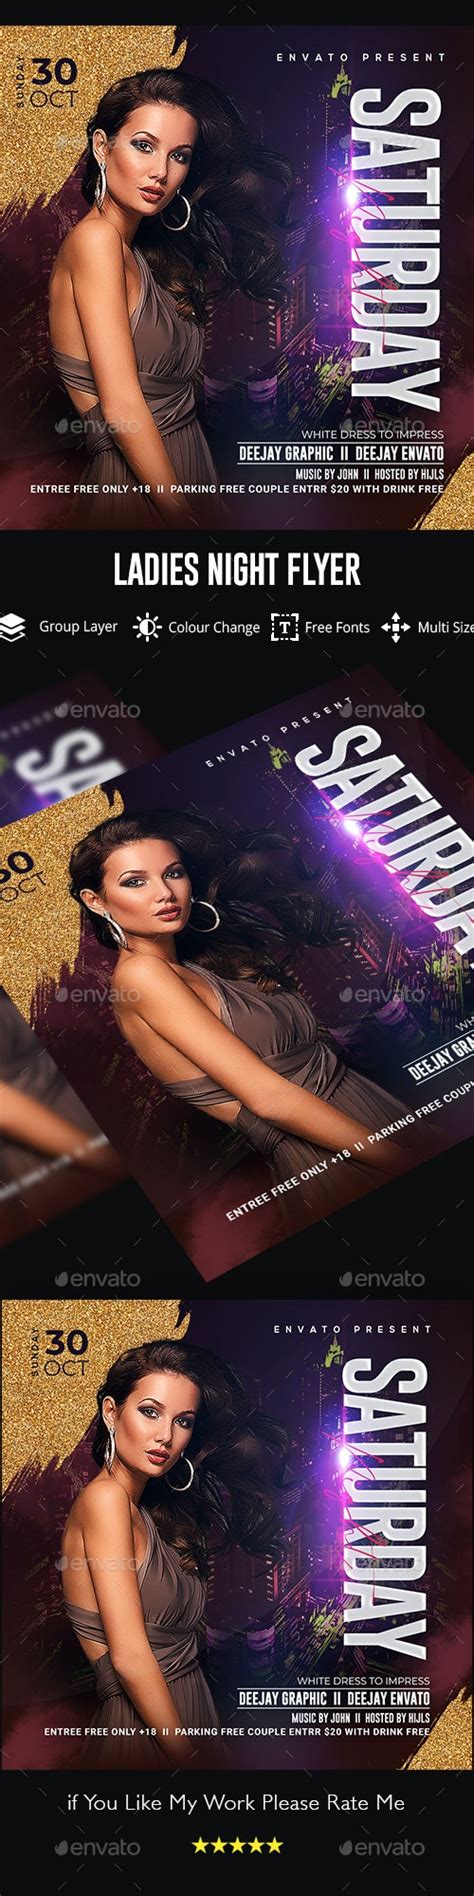 Ladies Night Flyer Template By Gouravdesigns Graphicriver